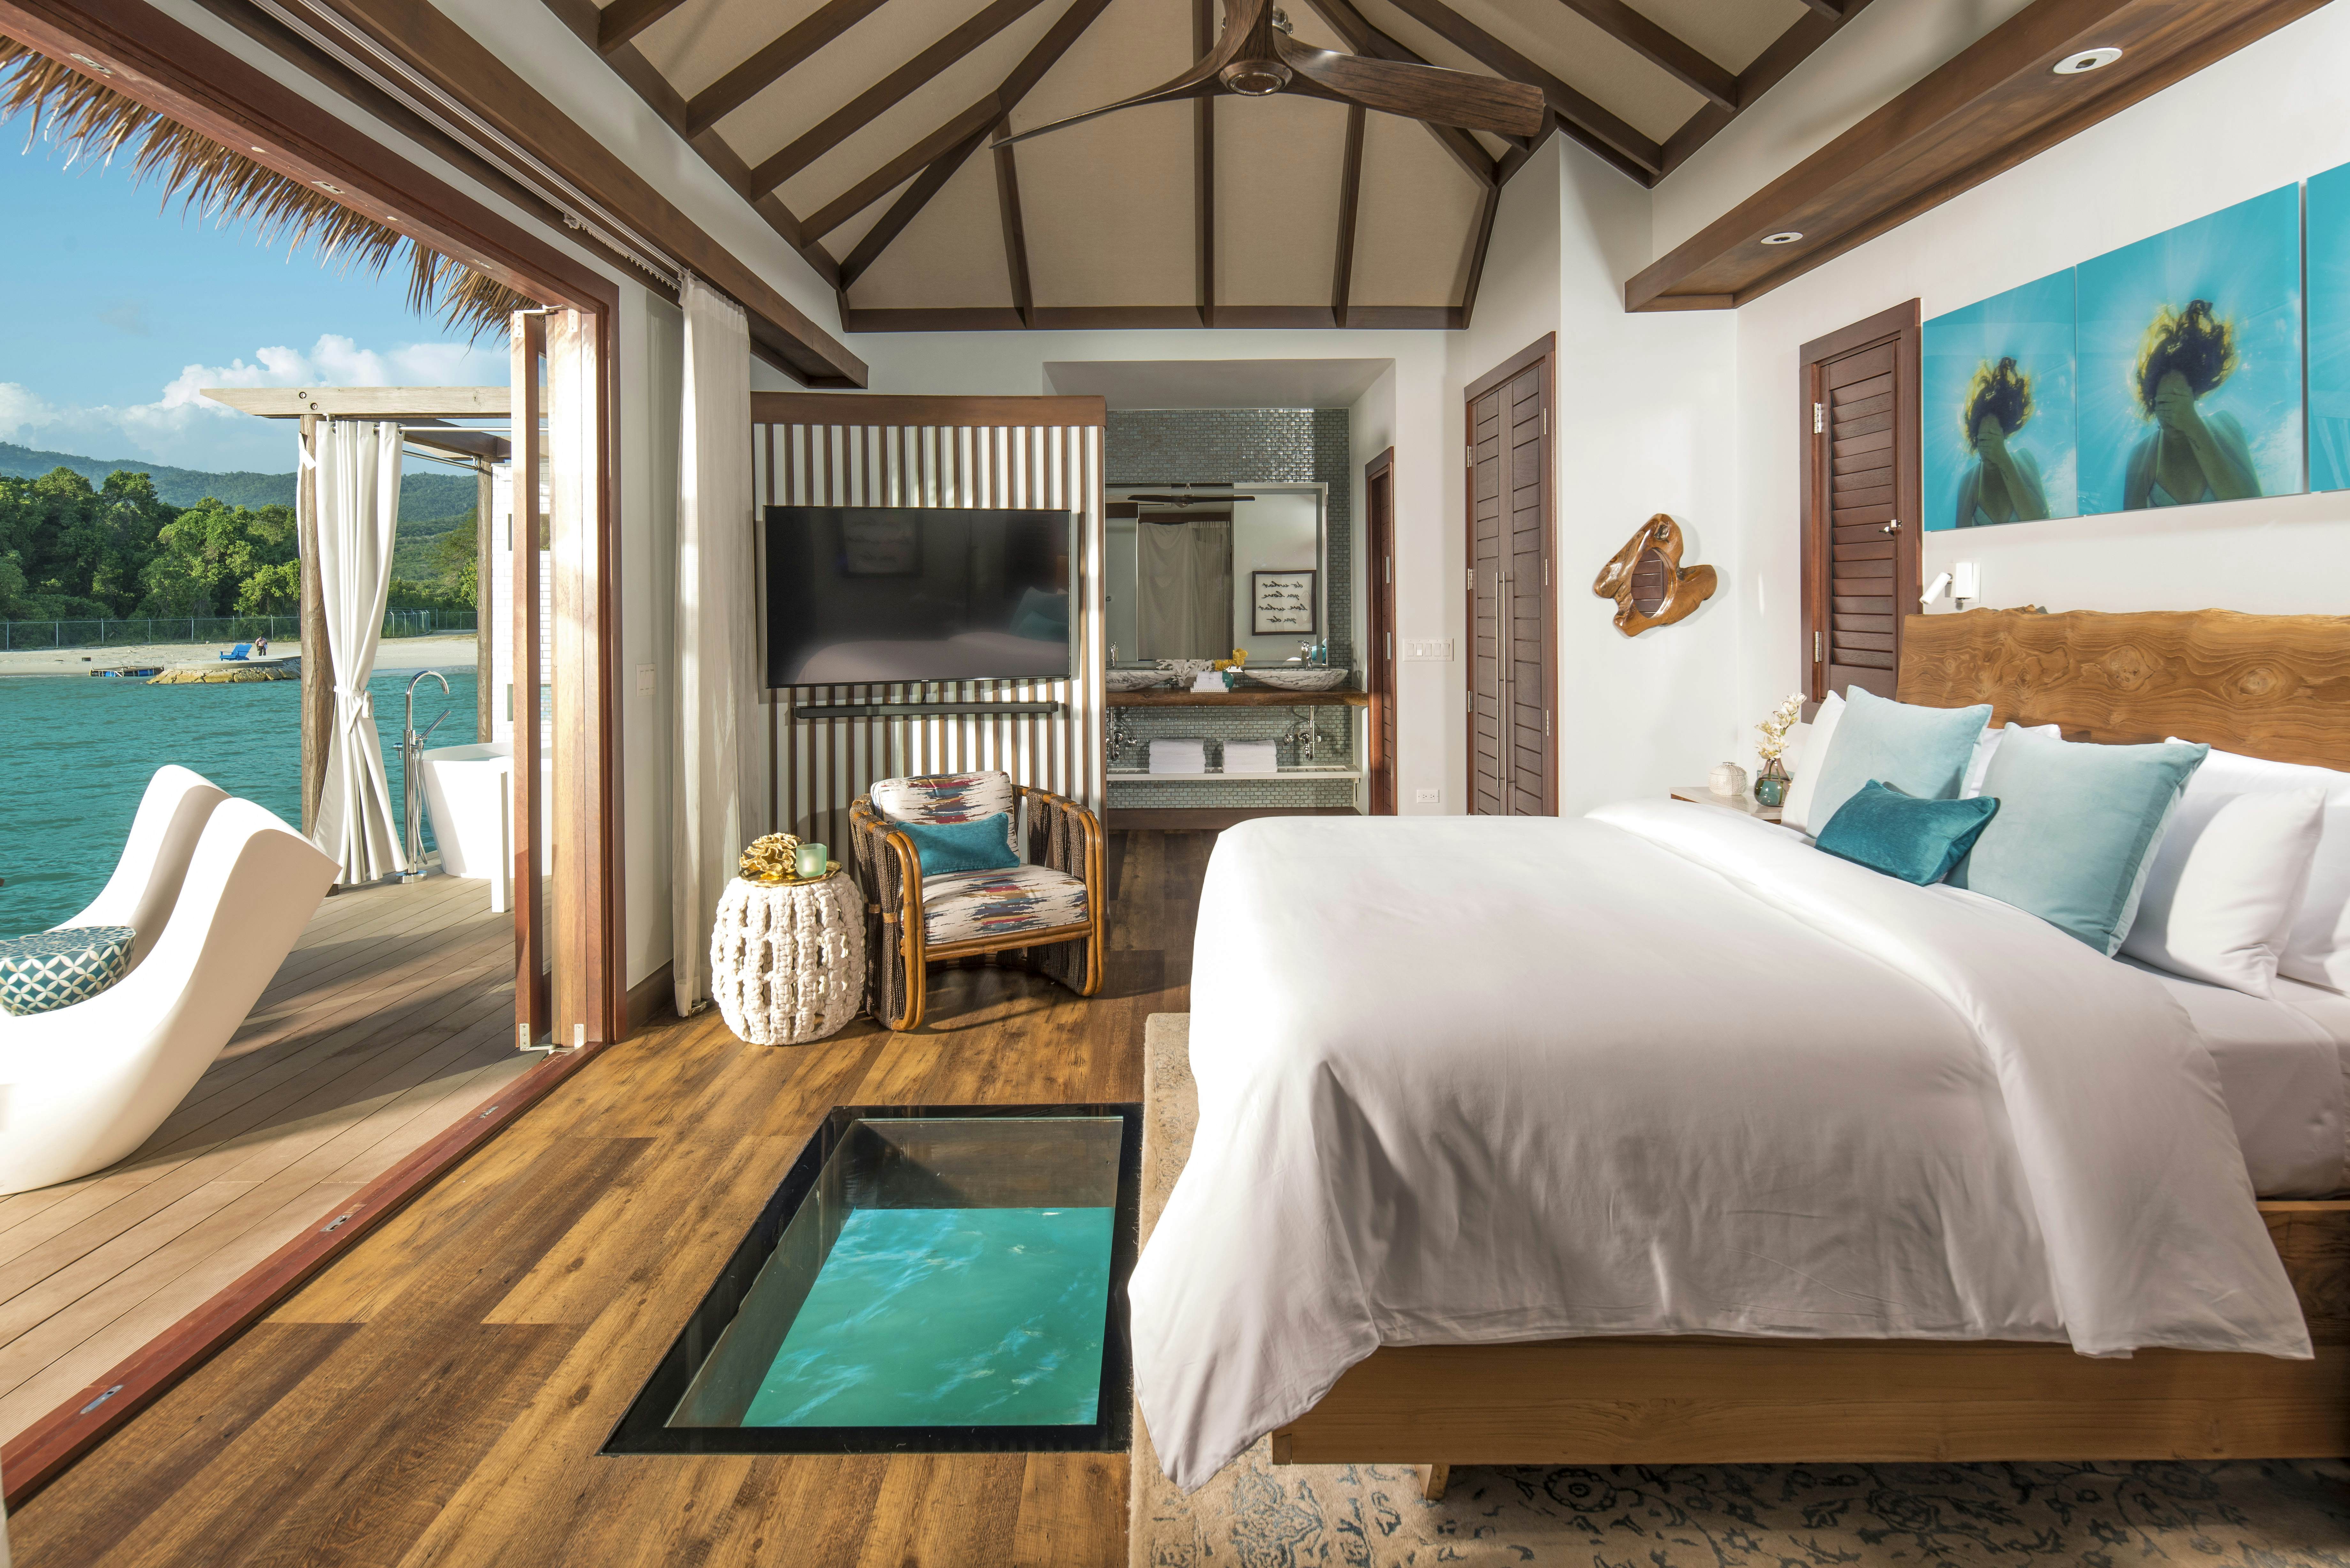 The Caribbeans First Overwater Hotel  Sandals Resorts Opens OvertheWater  Villas In Jamaica